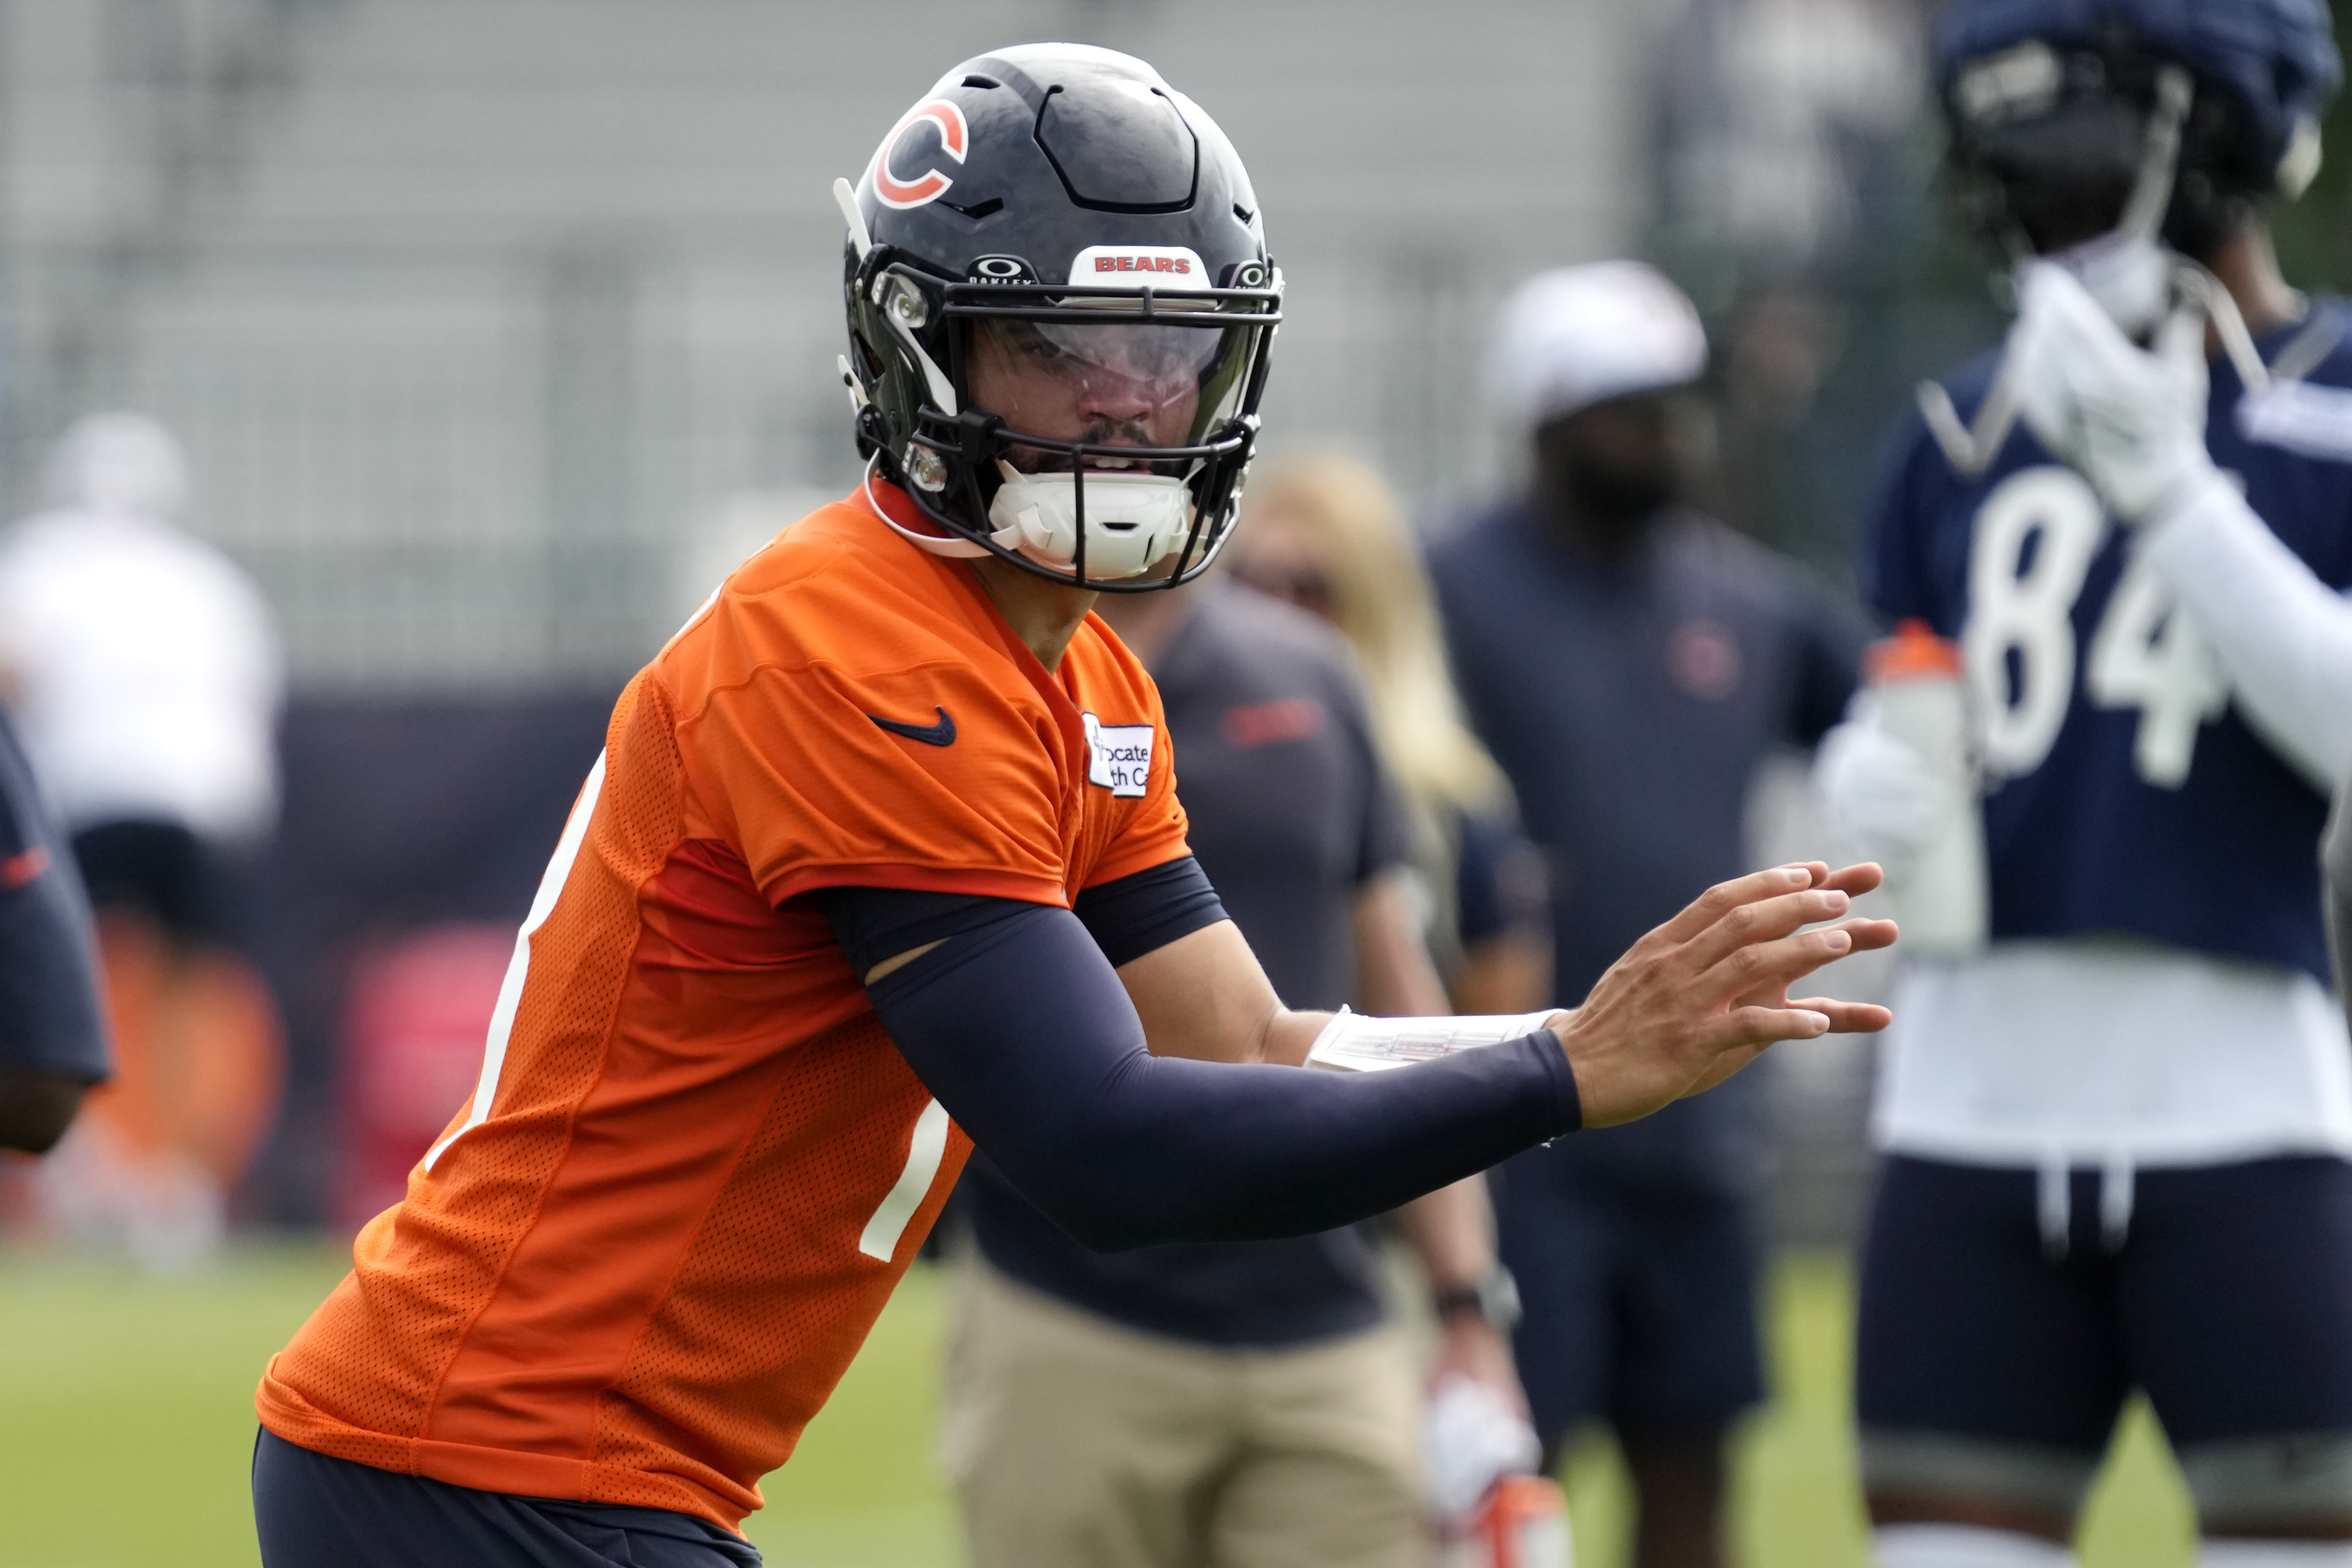 With QB Caleb Williams on a rookie deal, the time is now for the Bears to strike